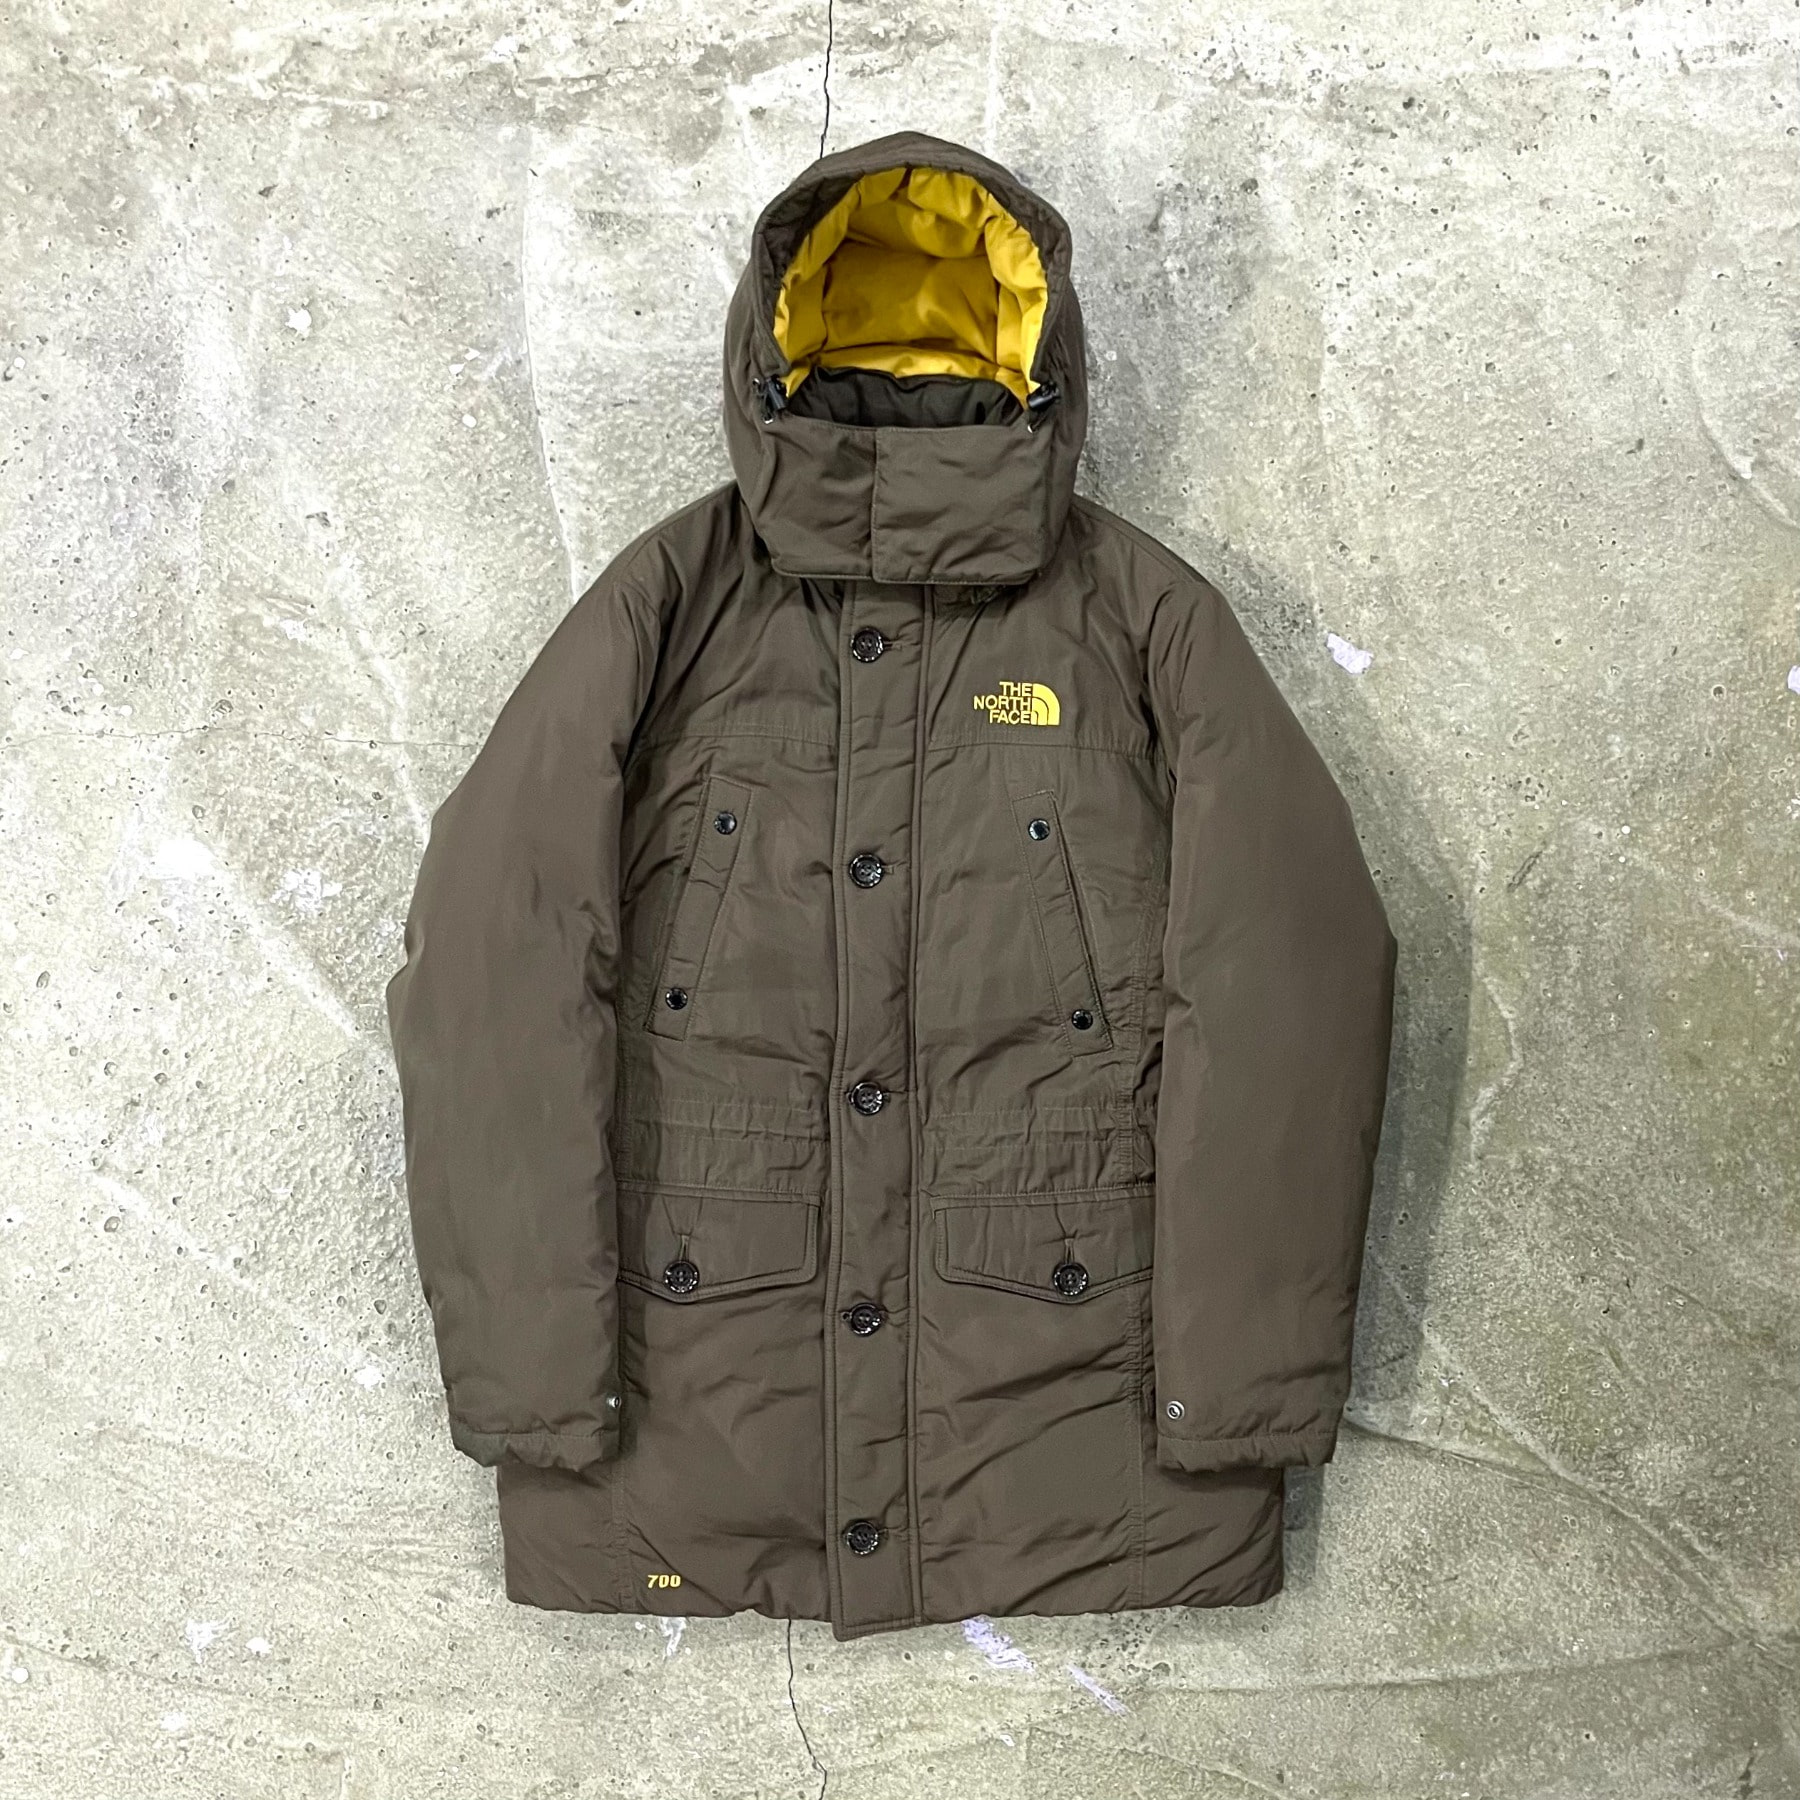 2013 The North Face Livingston Goose Down Jacket - 95